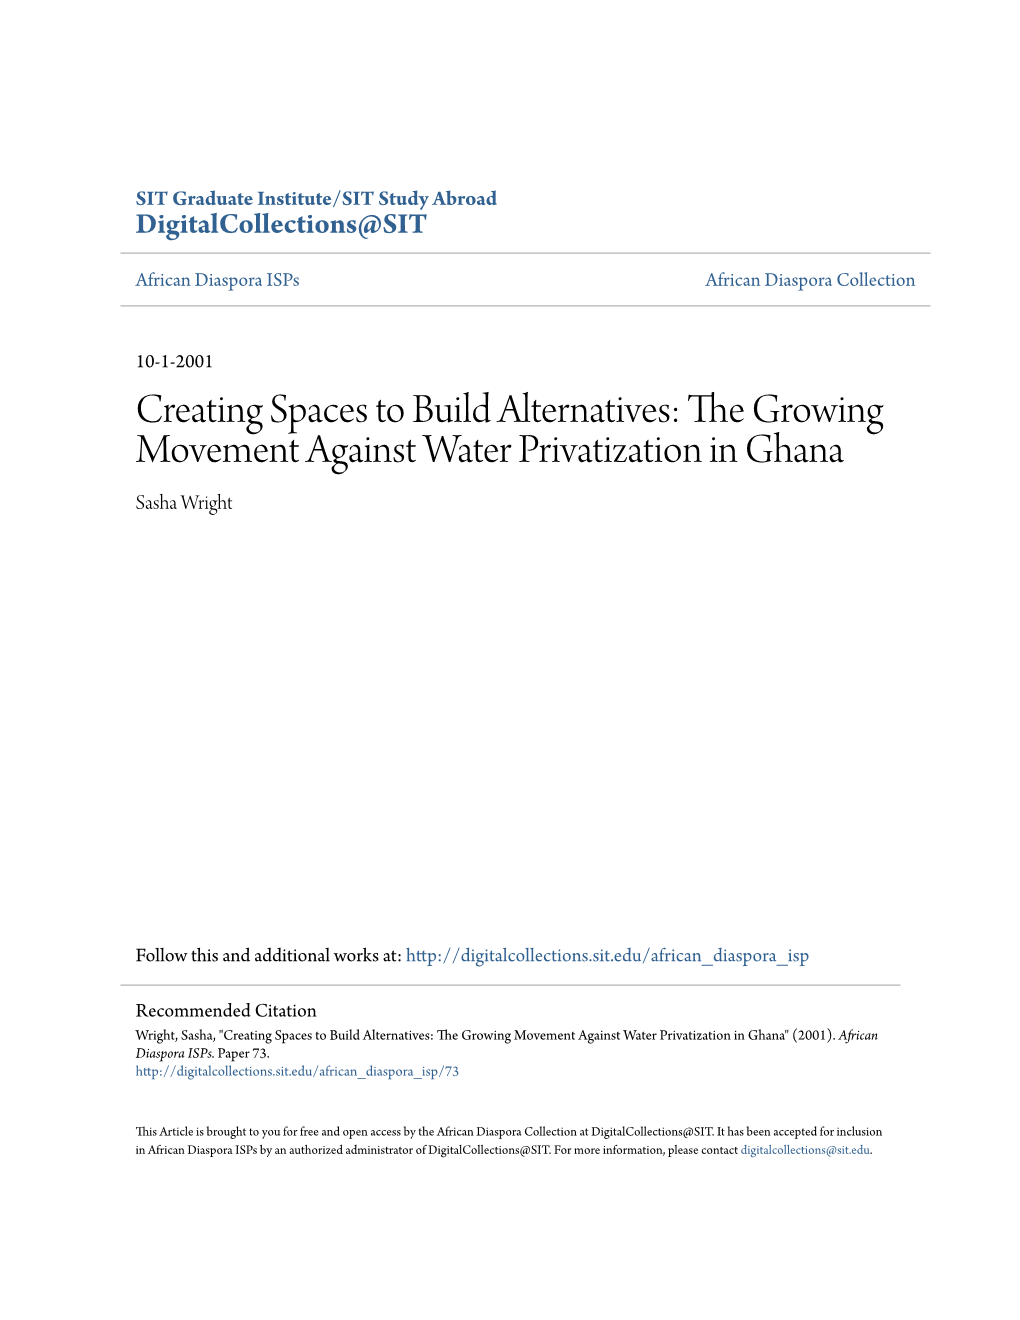 The Growing Movement Against Water Privatization in Ghana Sasha Wright